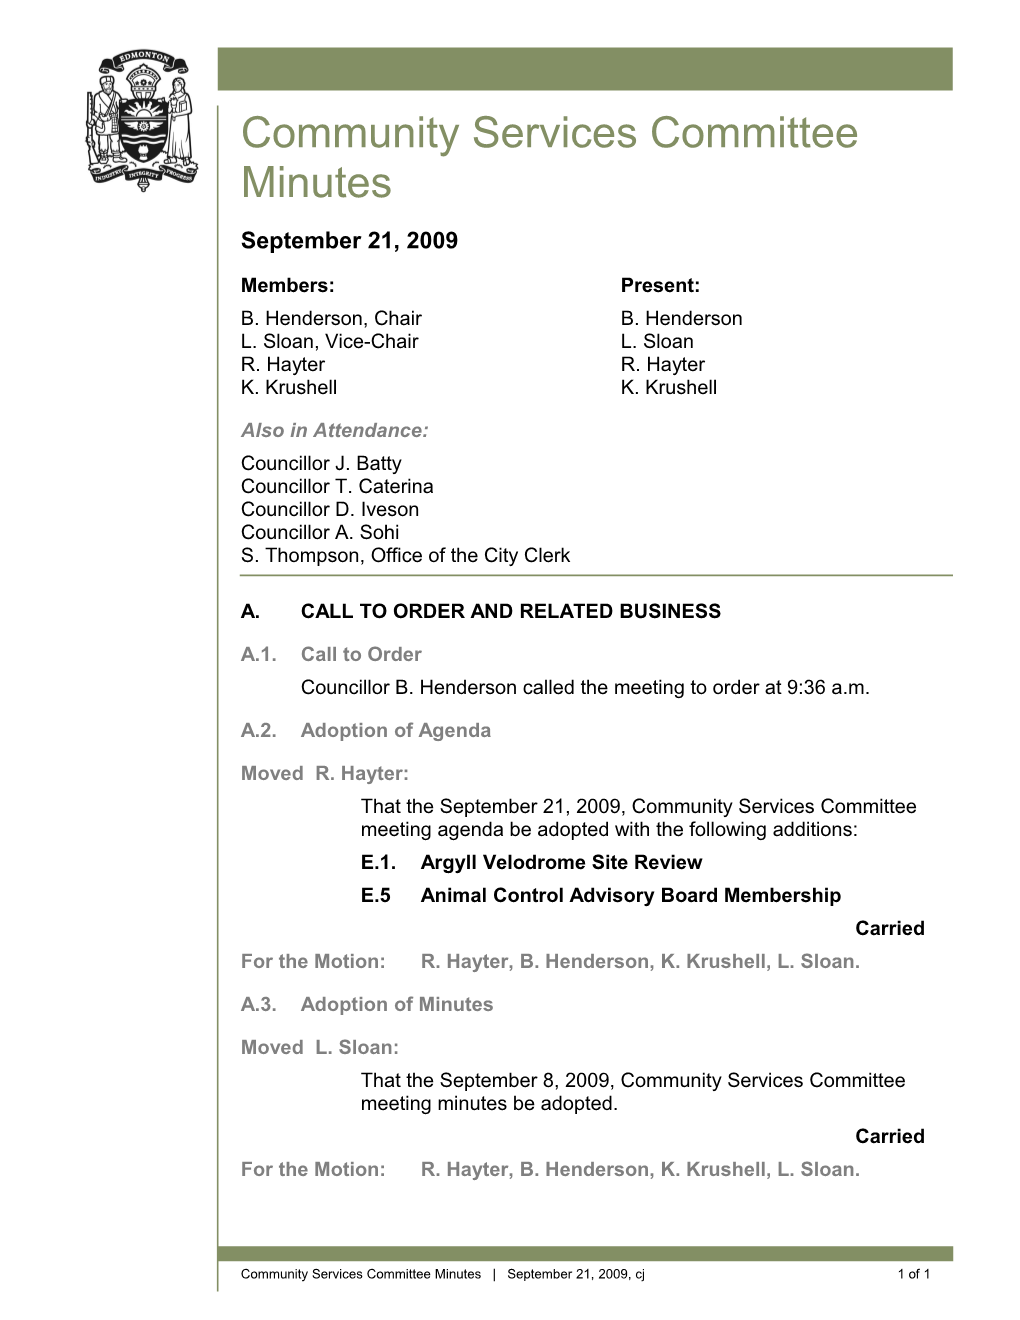 Minutes for Community Services Committee September 21, 2009 Meeting